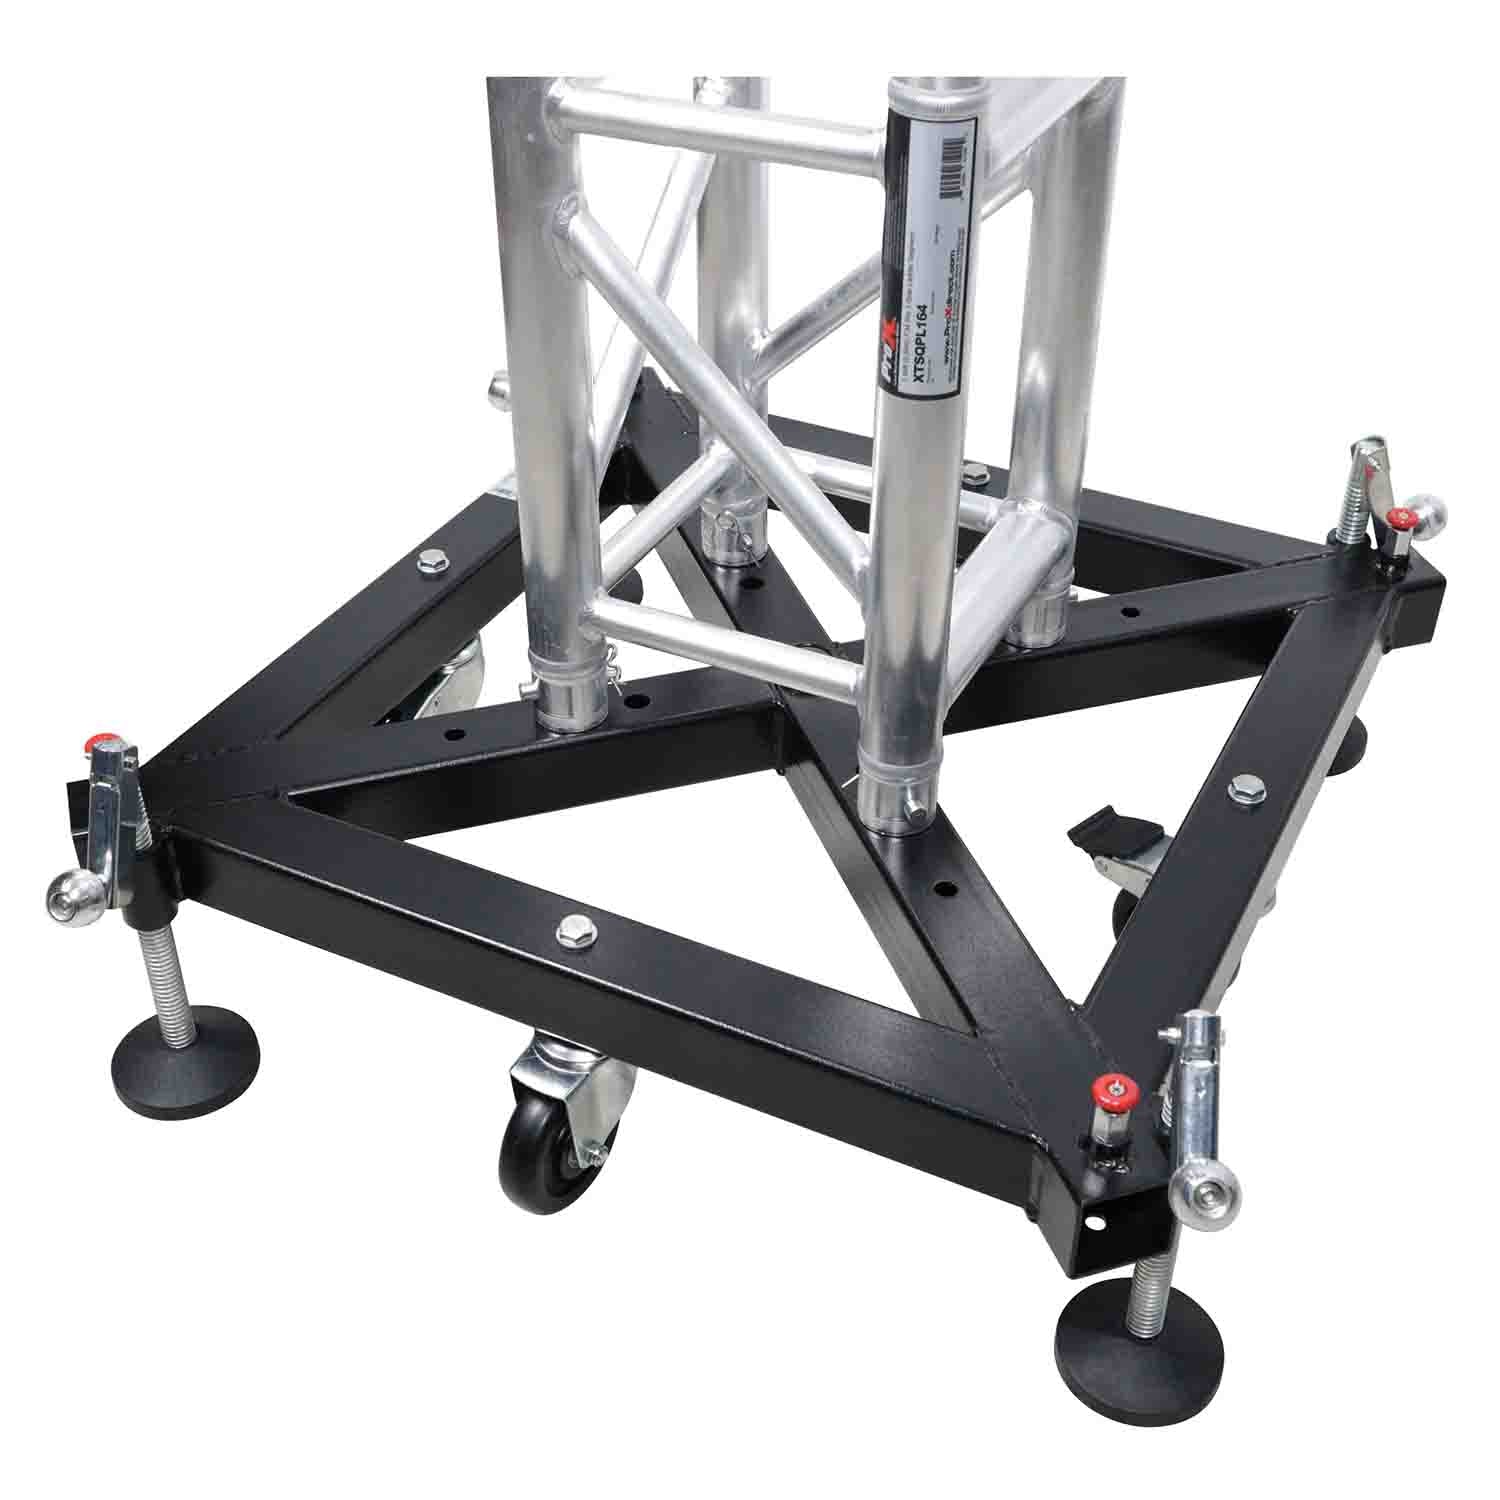 PROX XT-GSB MK3 Universal Vertical Tower Truss Ground Support Base on Wheels with Leveling Jacks for F34, F44 and 12" Bolt truss - Hollywood DJ